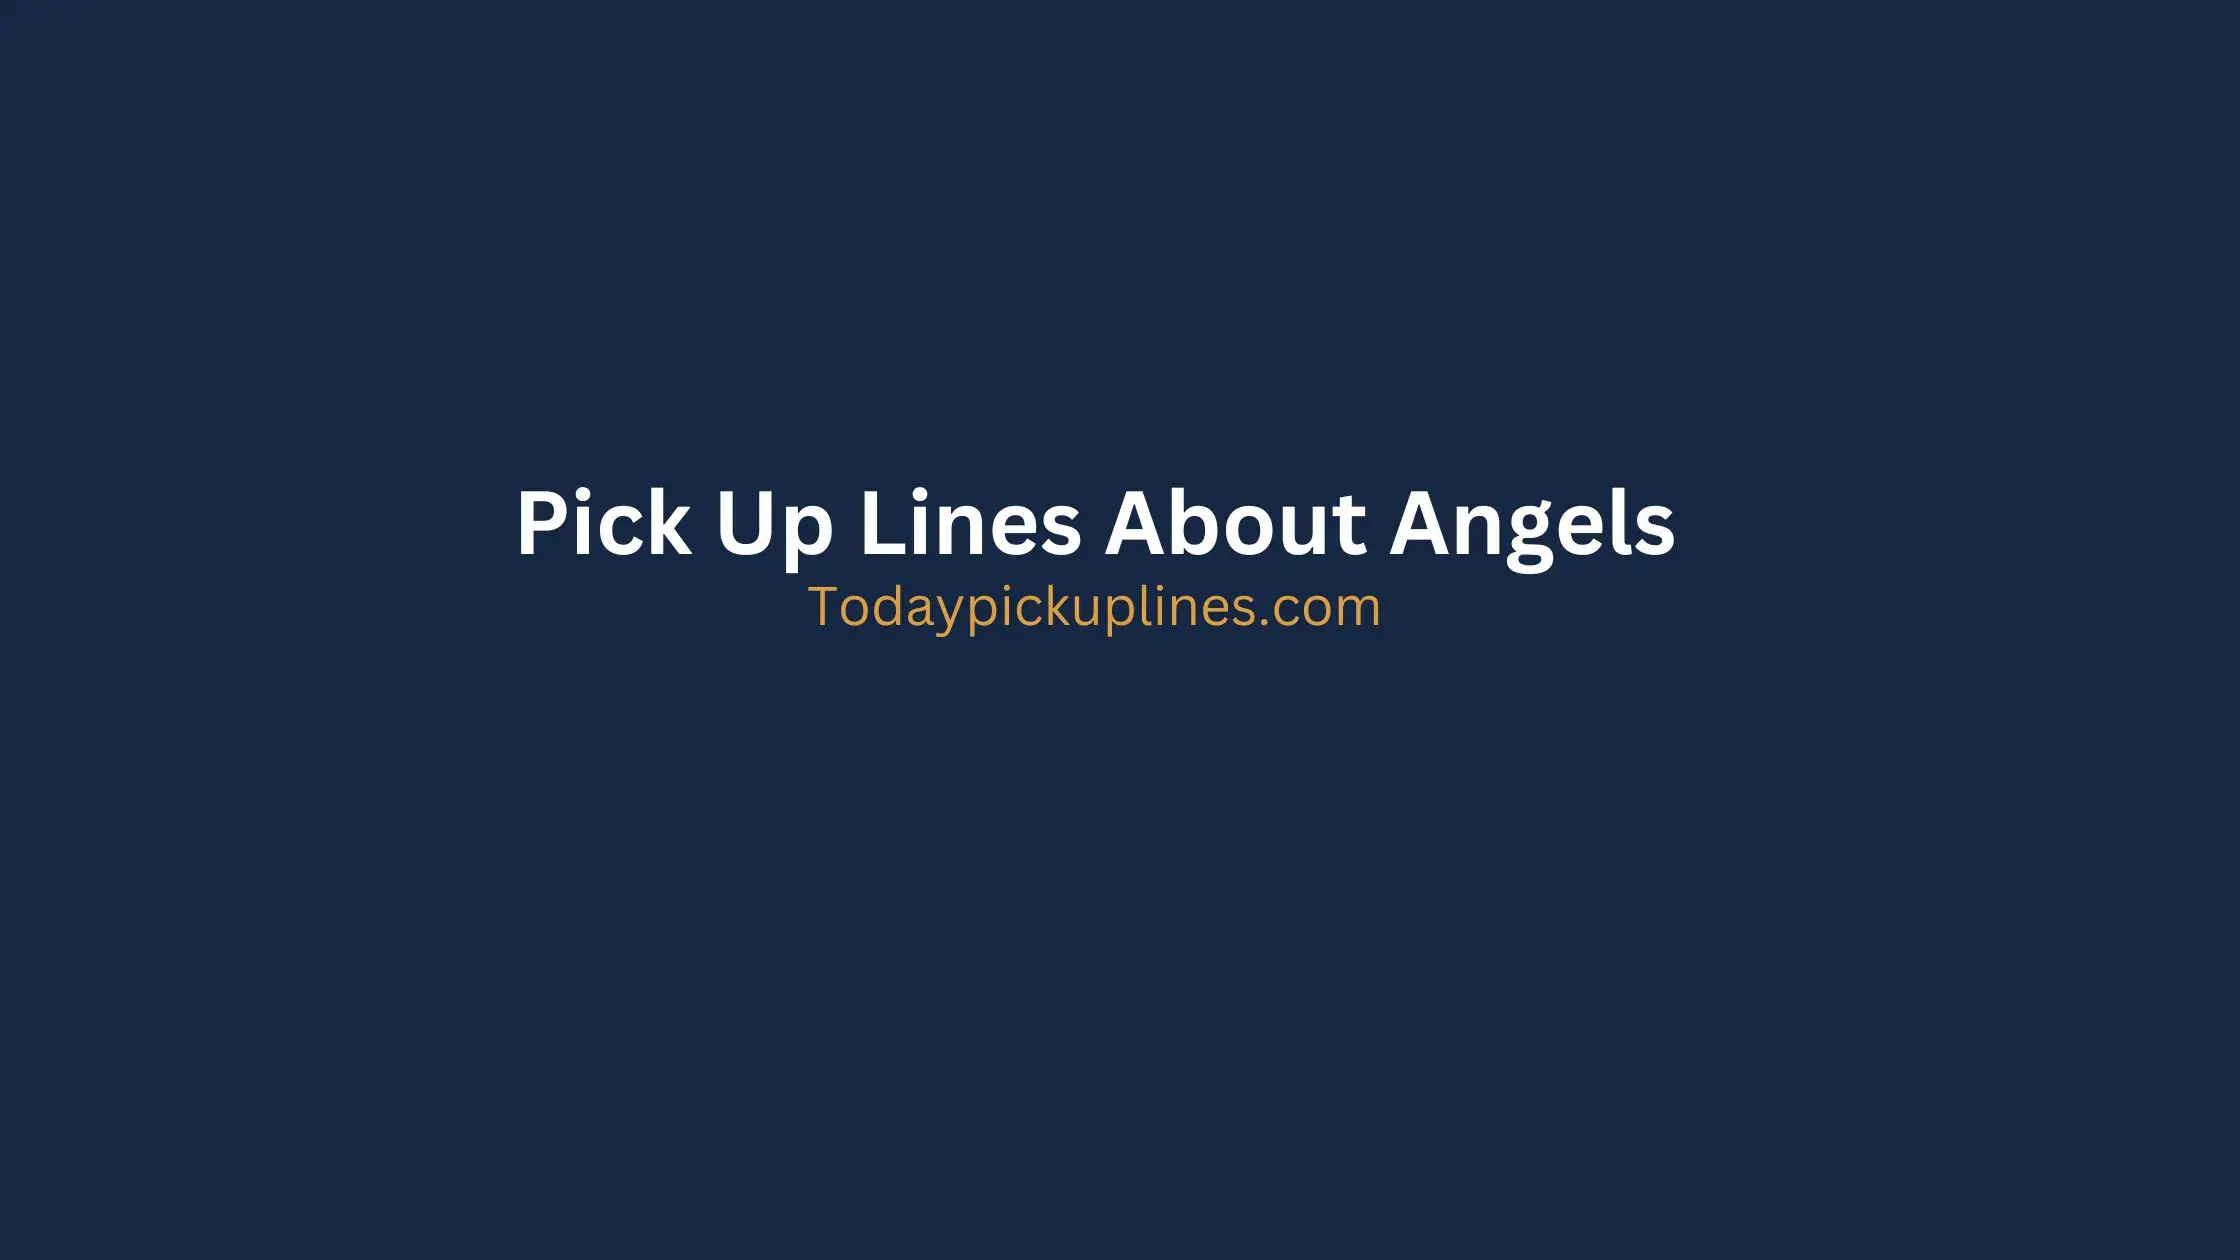 Pick Up Lines About Angels.webp